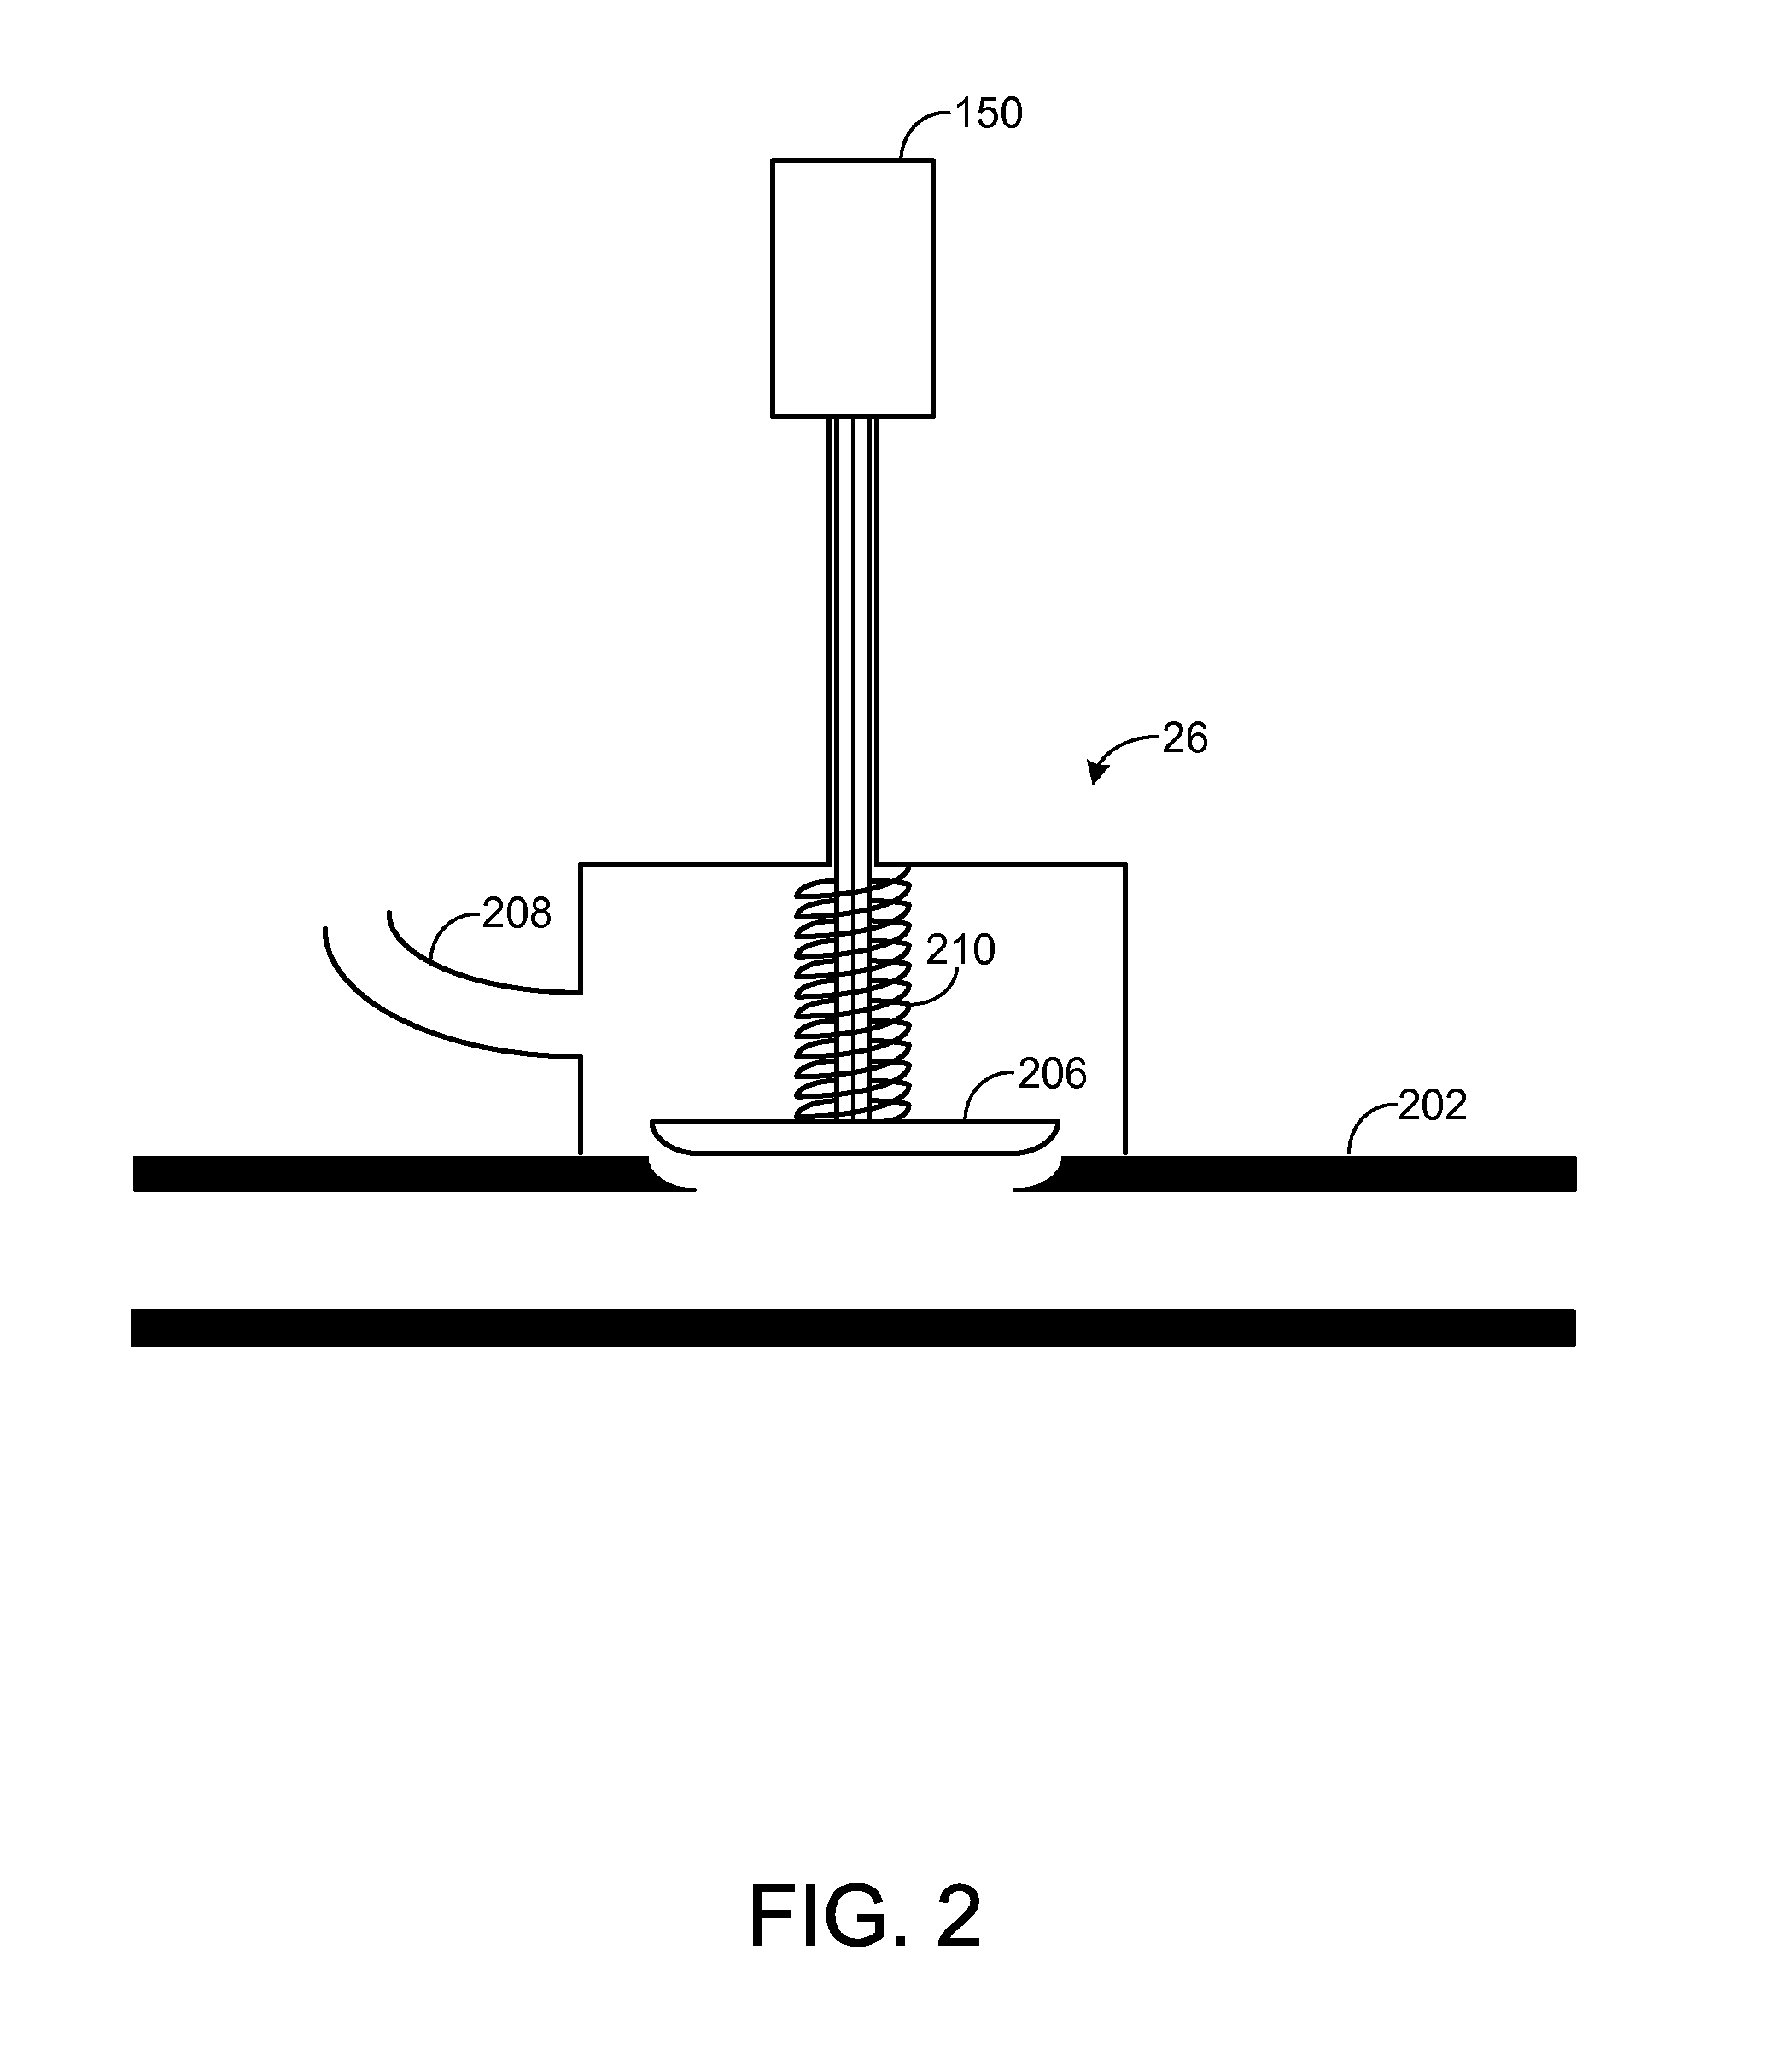 Method for controlling a turbocharger arrangement with an electric actuator and spring